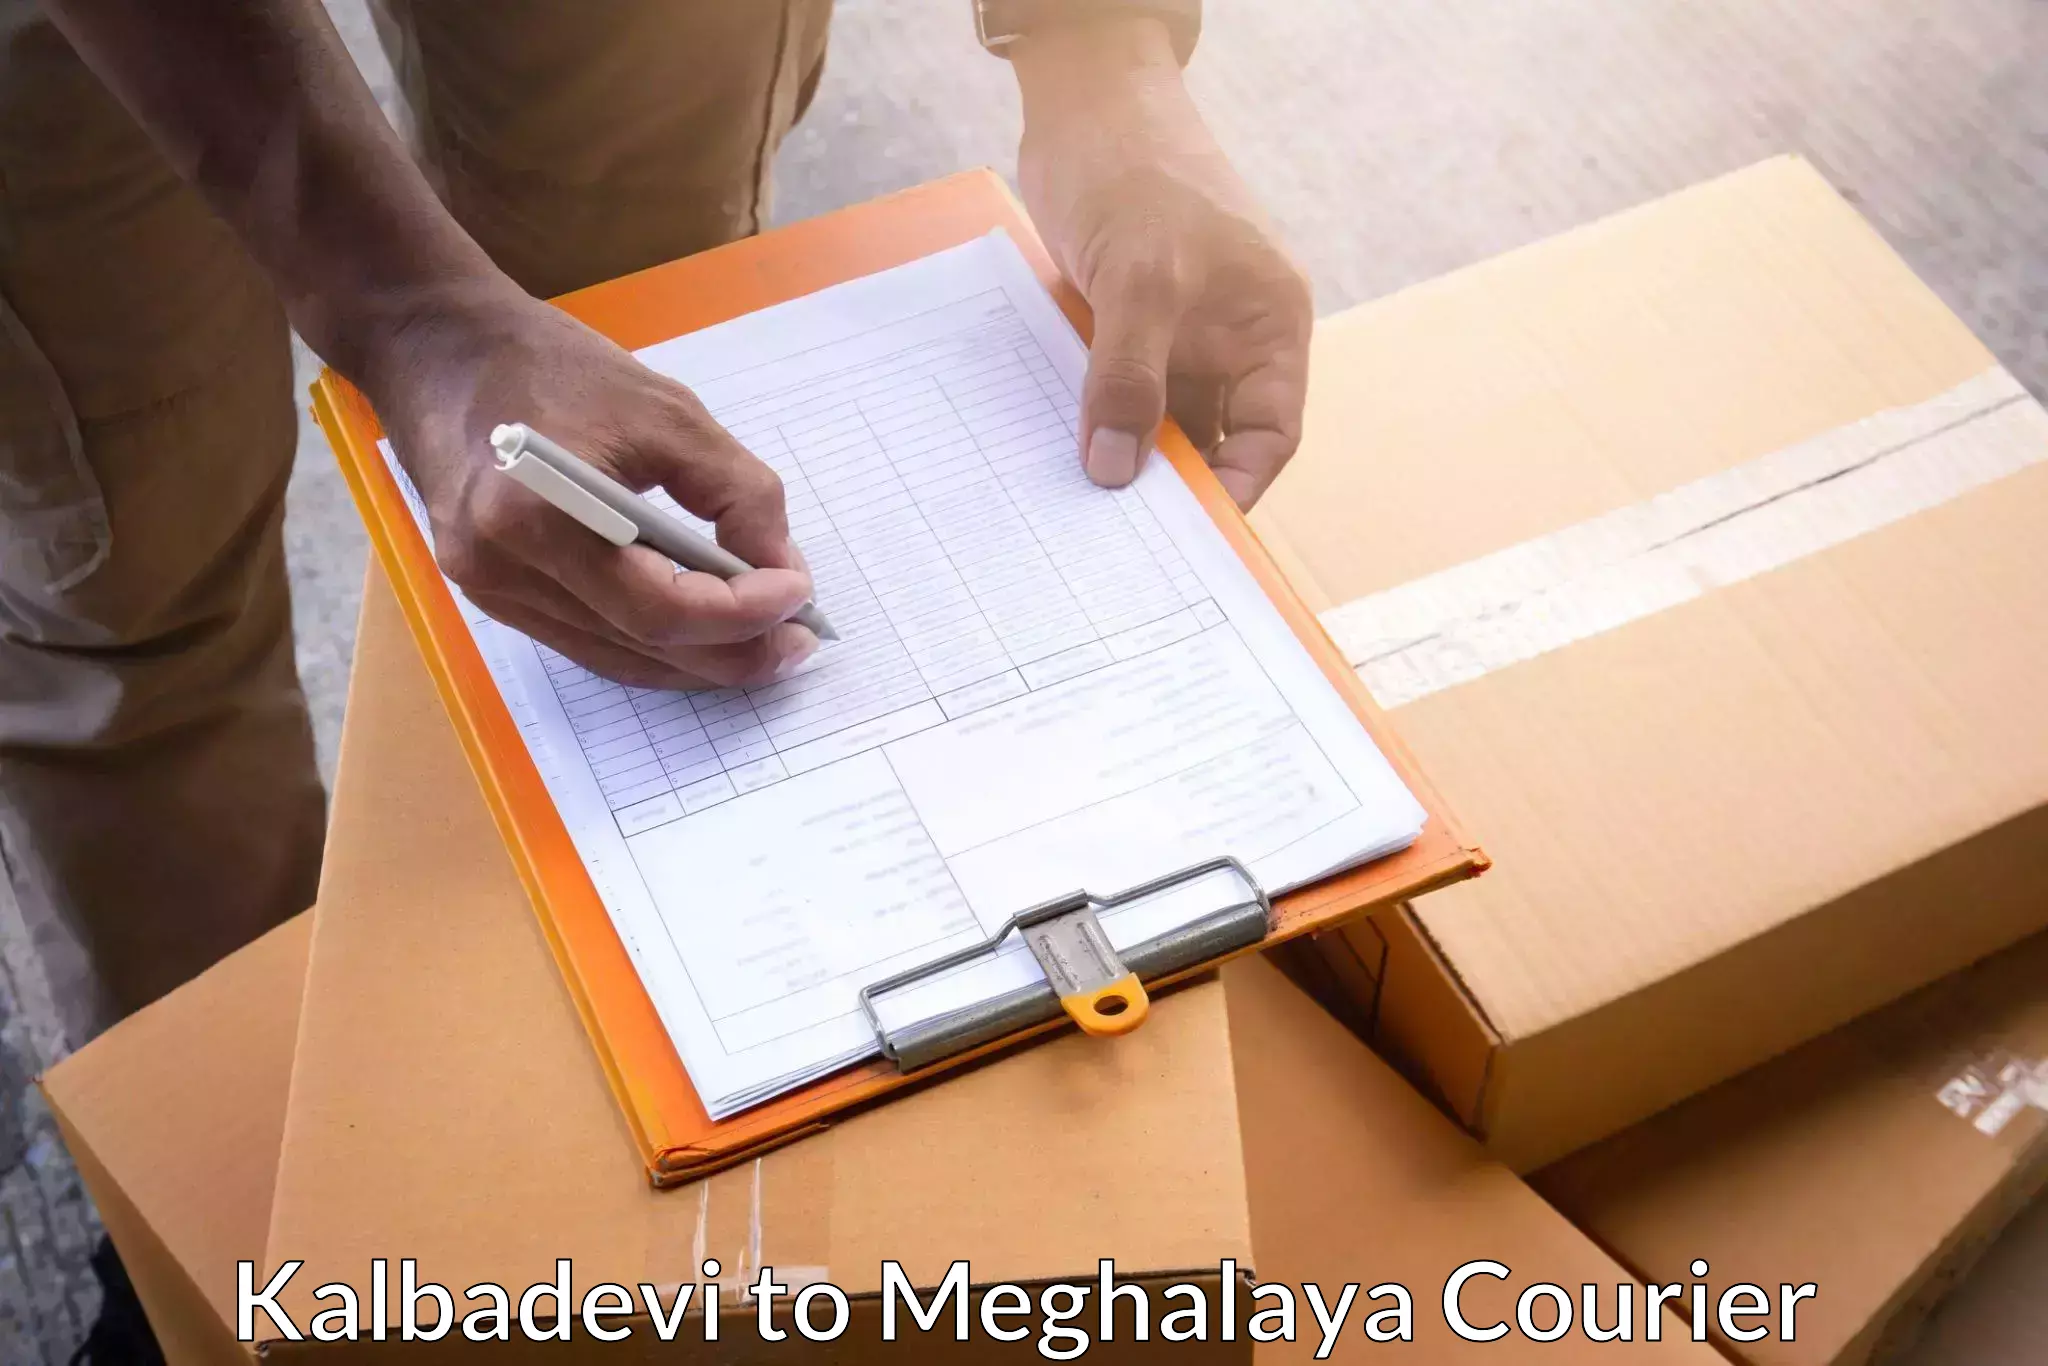 User-friendly courier app Kalbadevi to Shillong